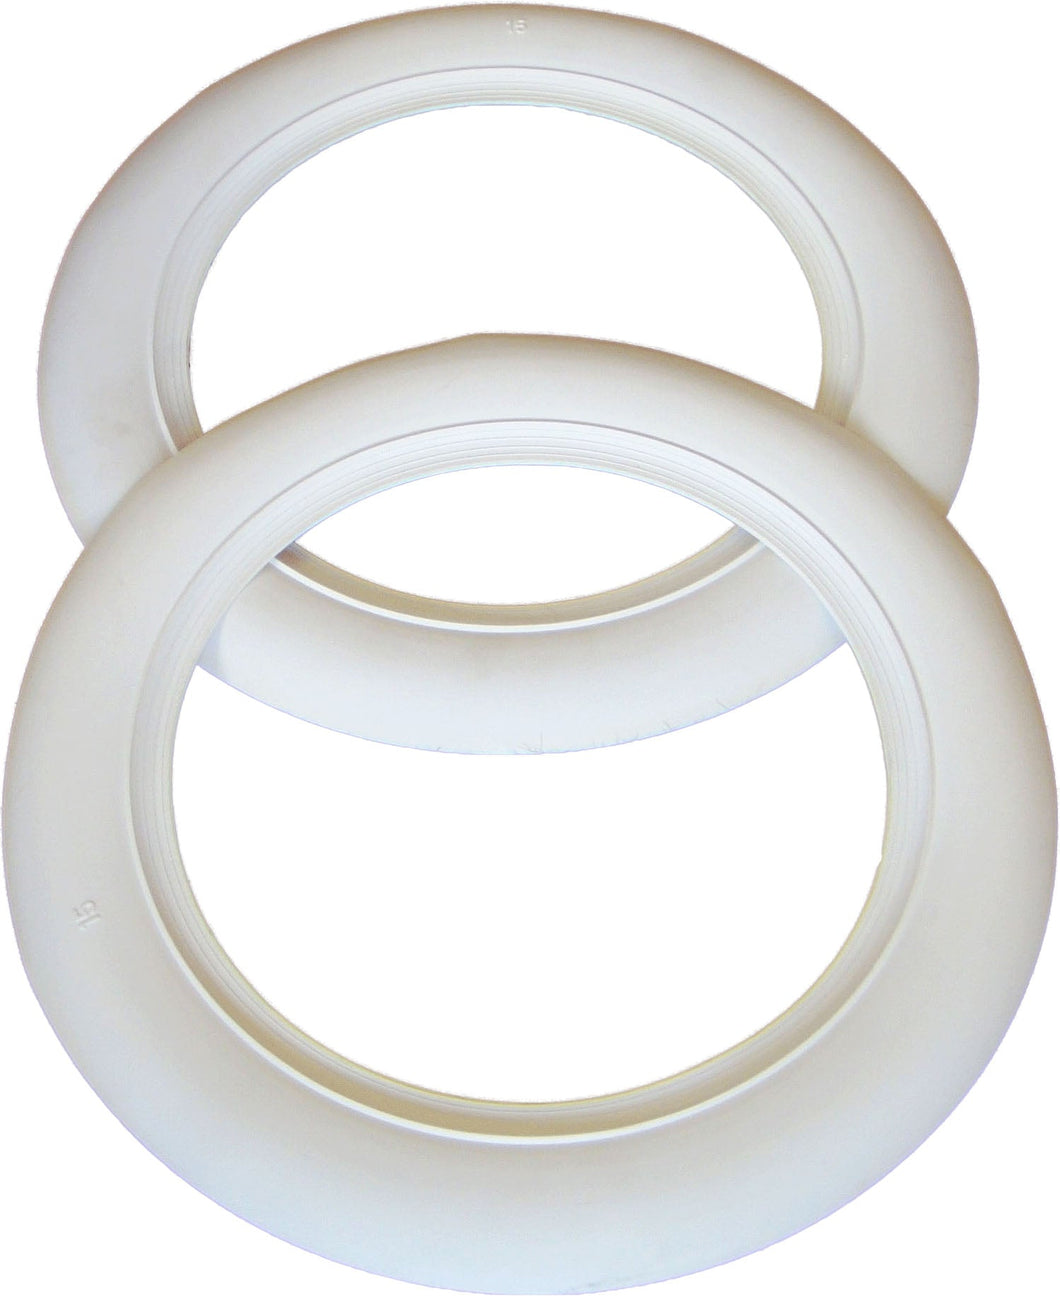 2 x 16'' Atlas Whitewall Inserts (set of 2) - 1 1/2'' (45mm) wide